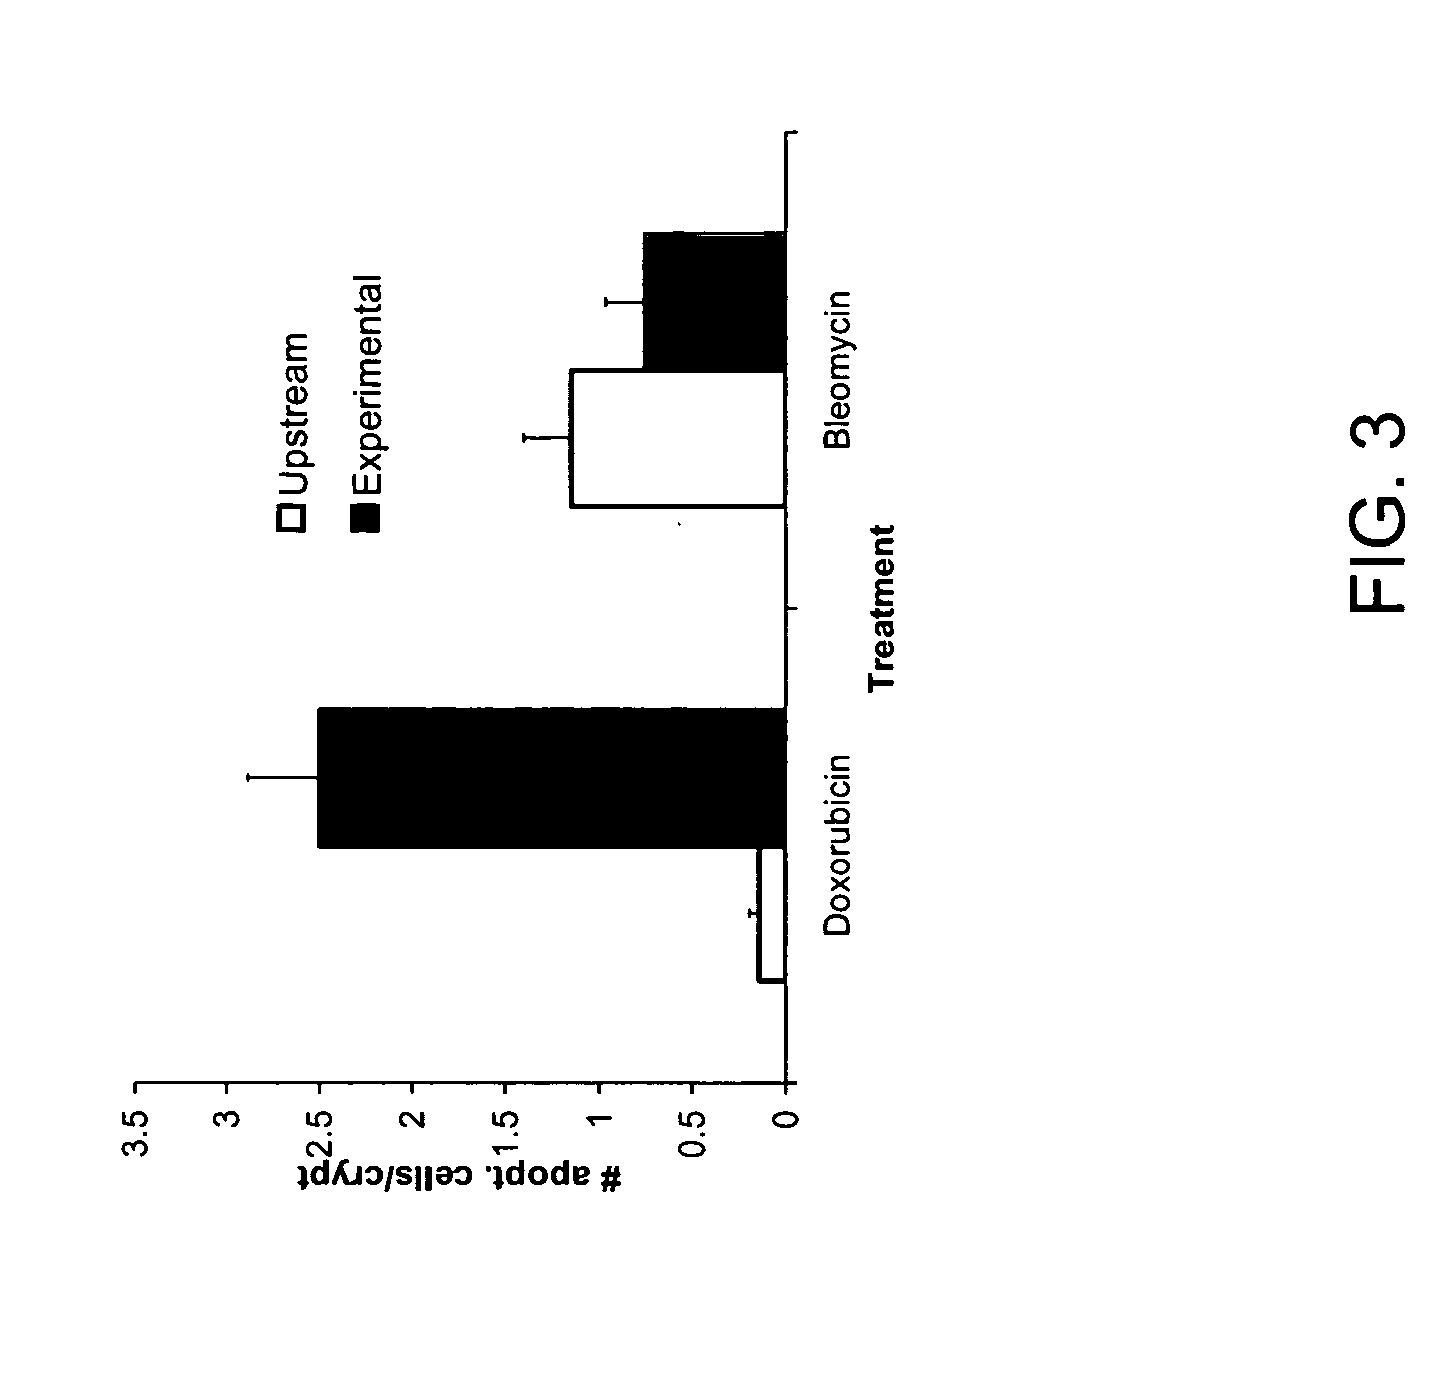 Gastrointestinal stem cells and uses thereof